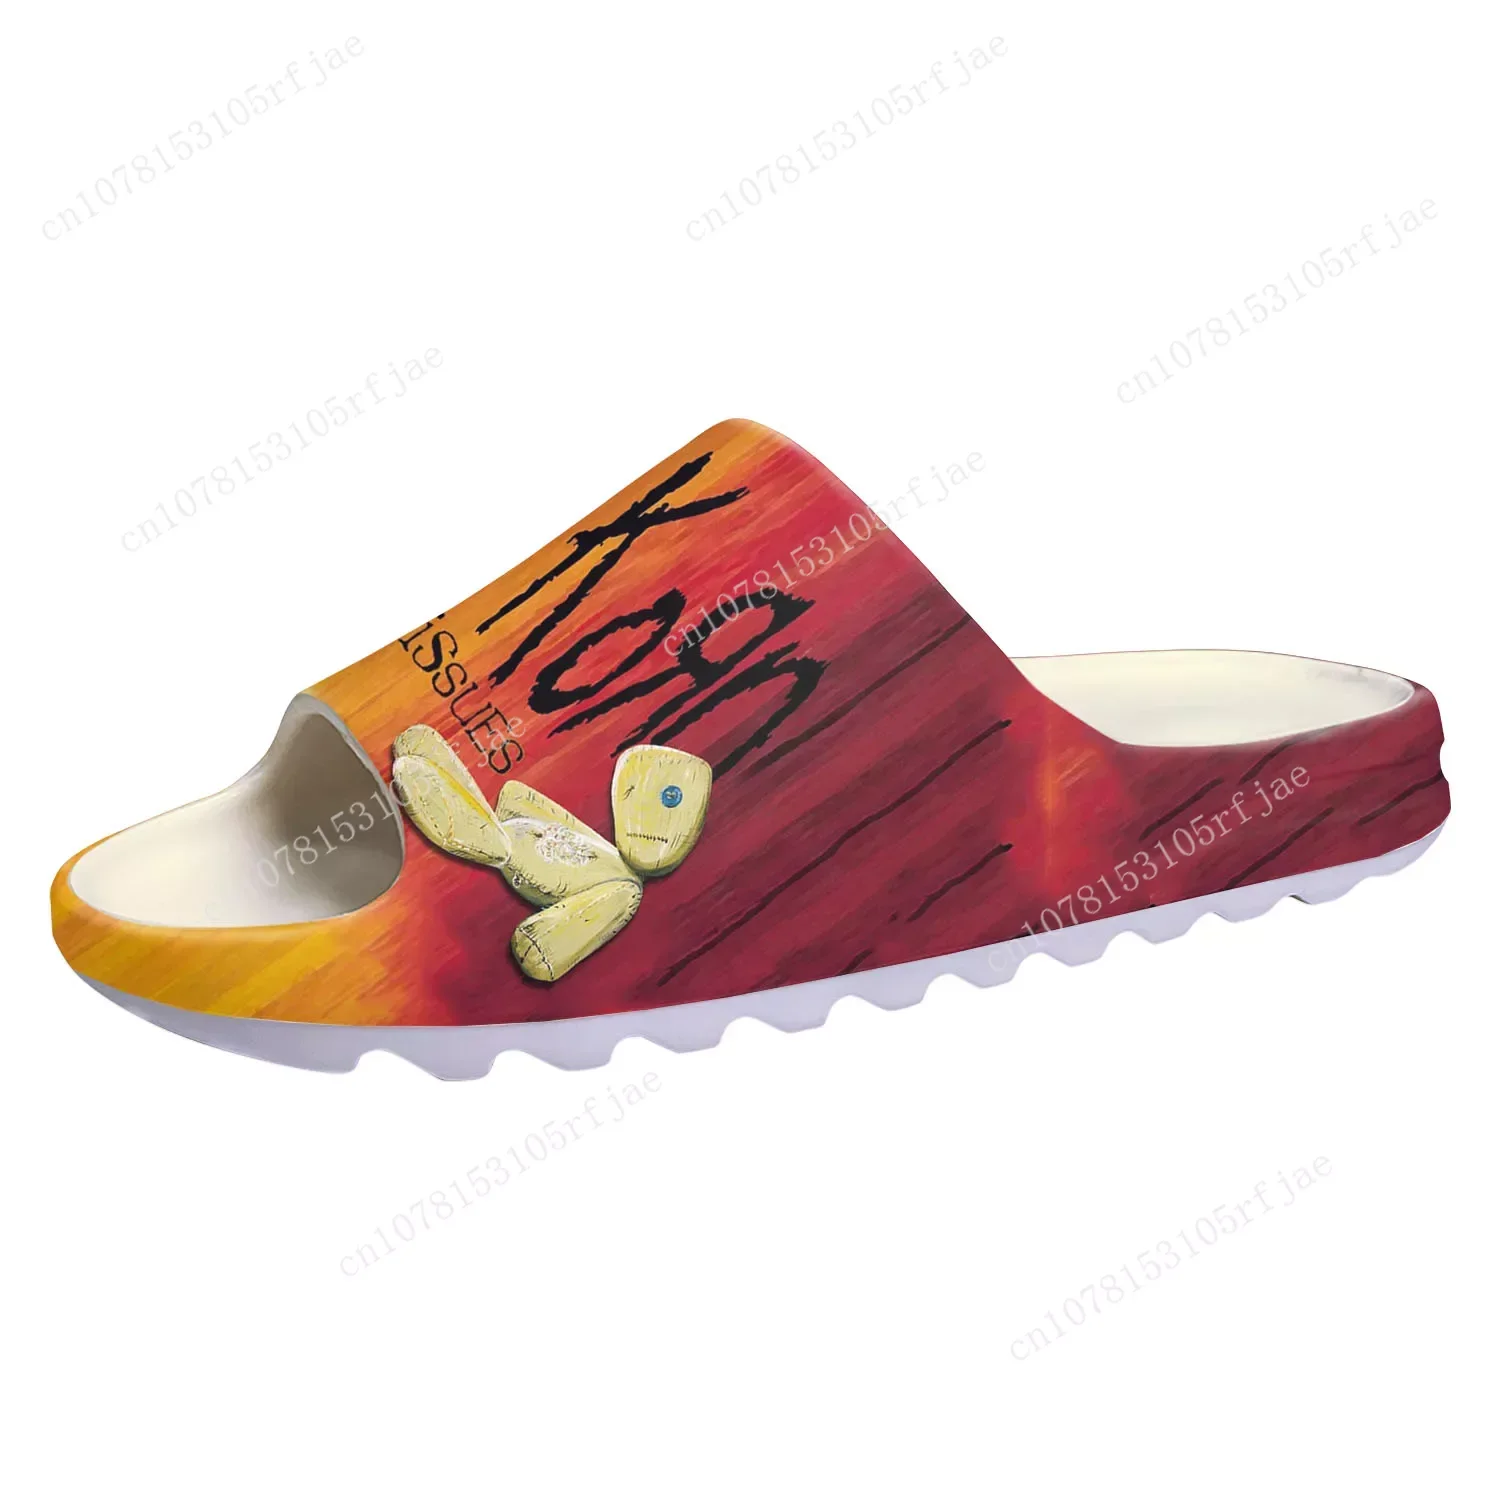 

Korn Rock Band Soft Sole Sllipers Home Clogs Step on Water Shoes Mens Womens Teenager Bathroom Beach Customize on Shit Sandals